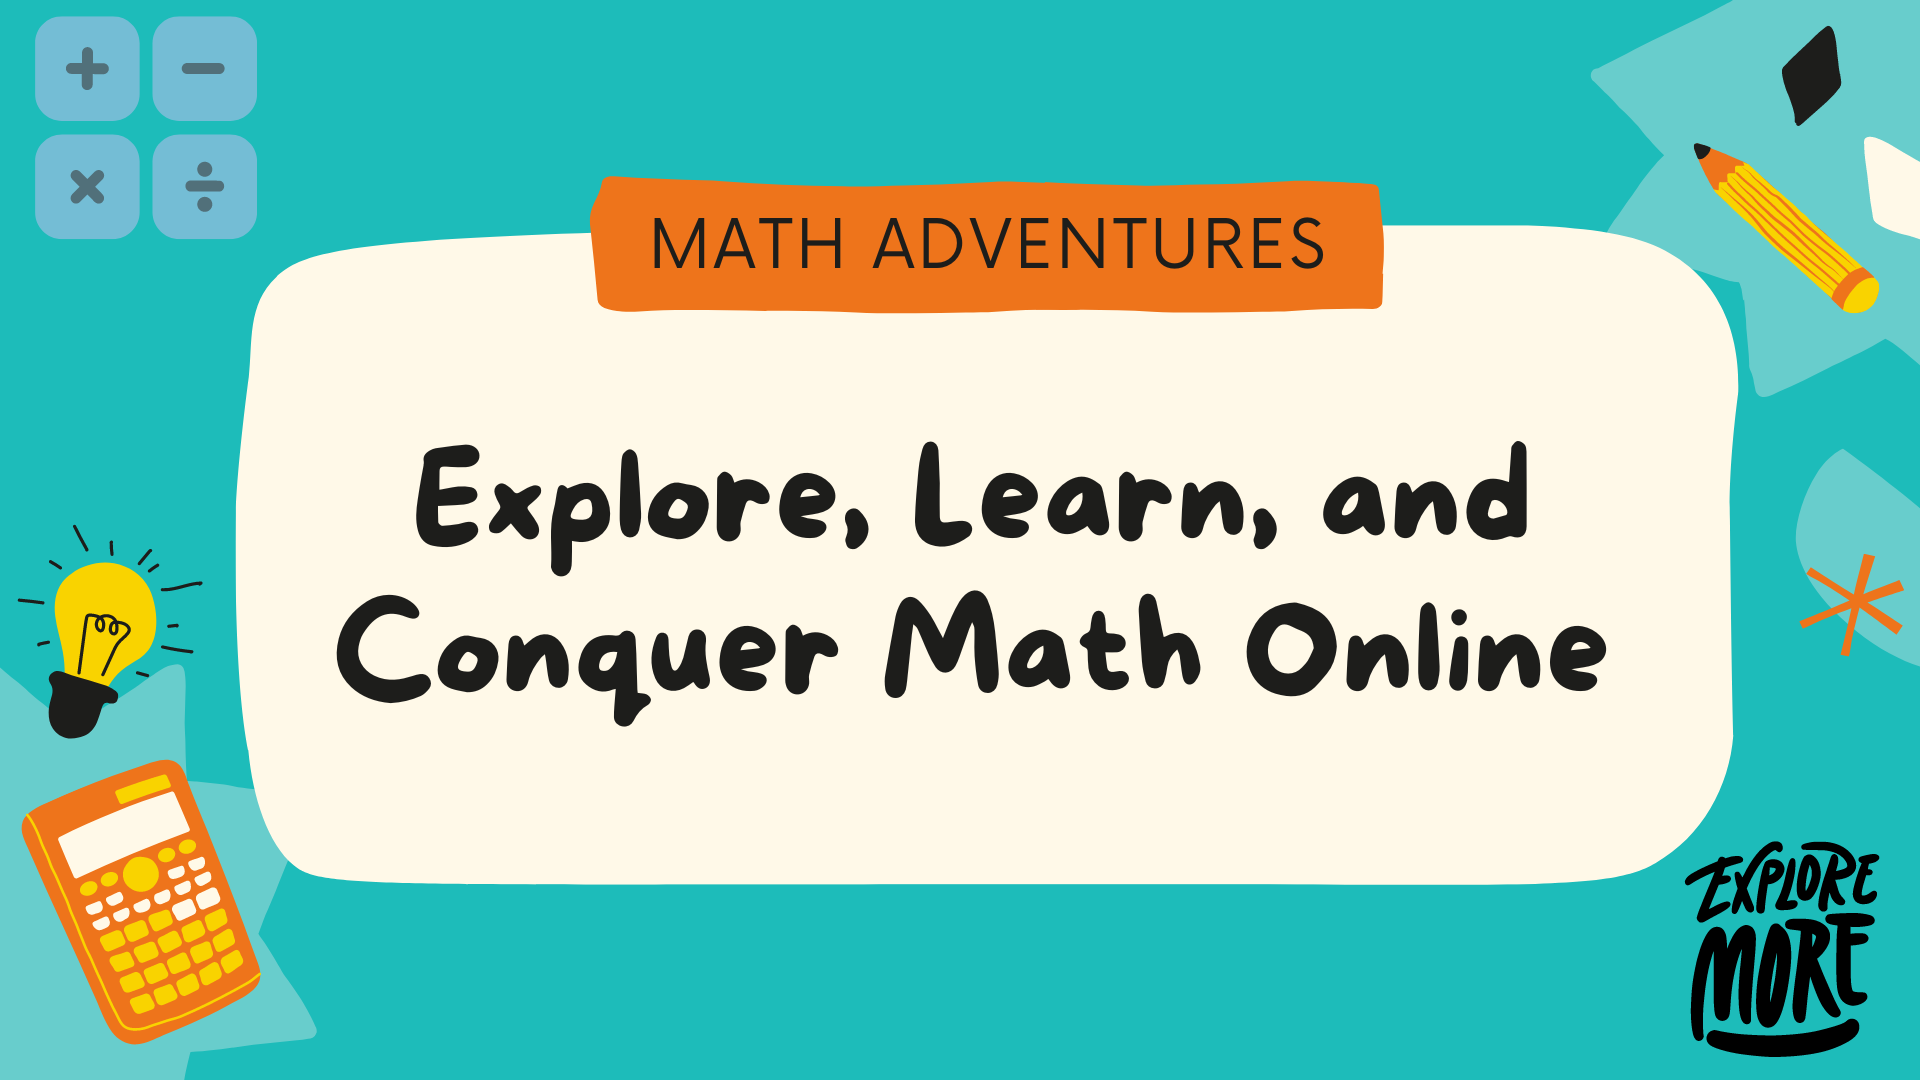 Math Adventures: Explore, Learn, and Conquer Math Online